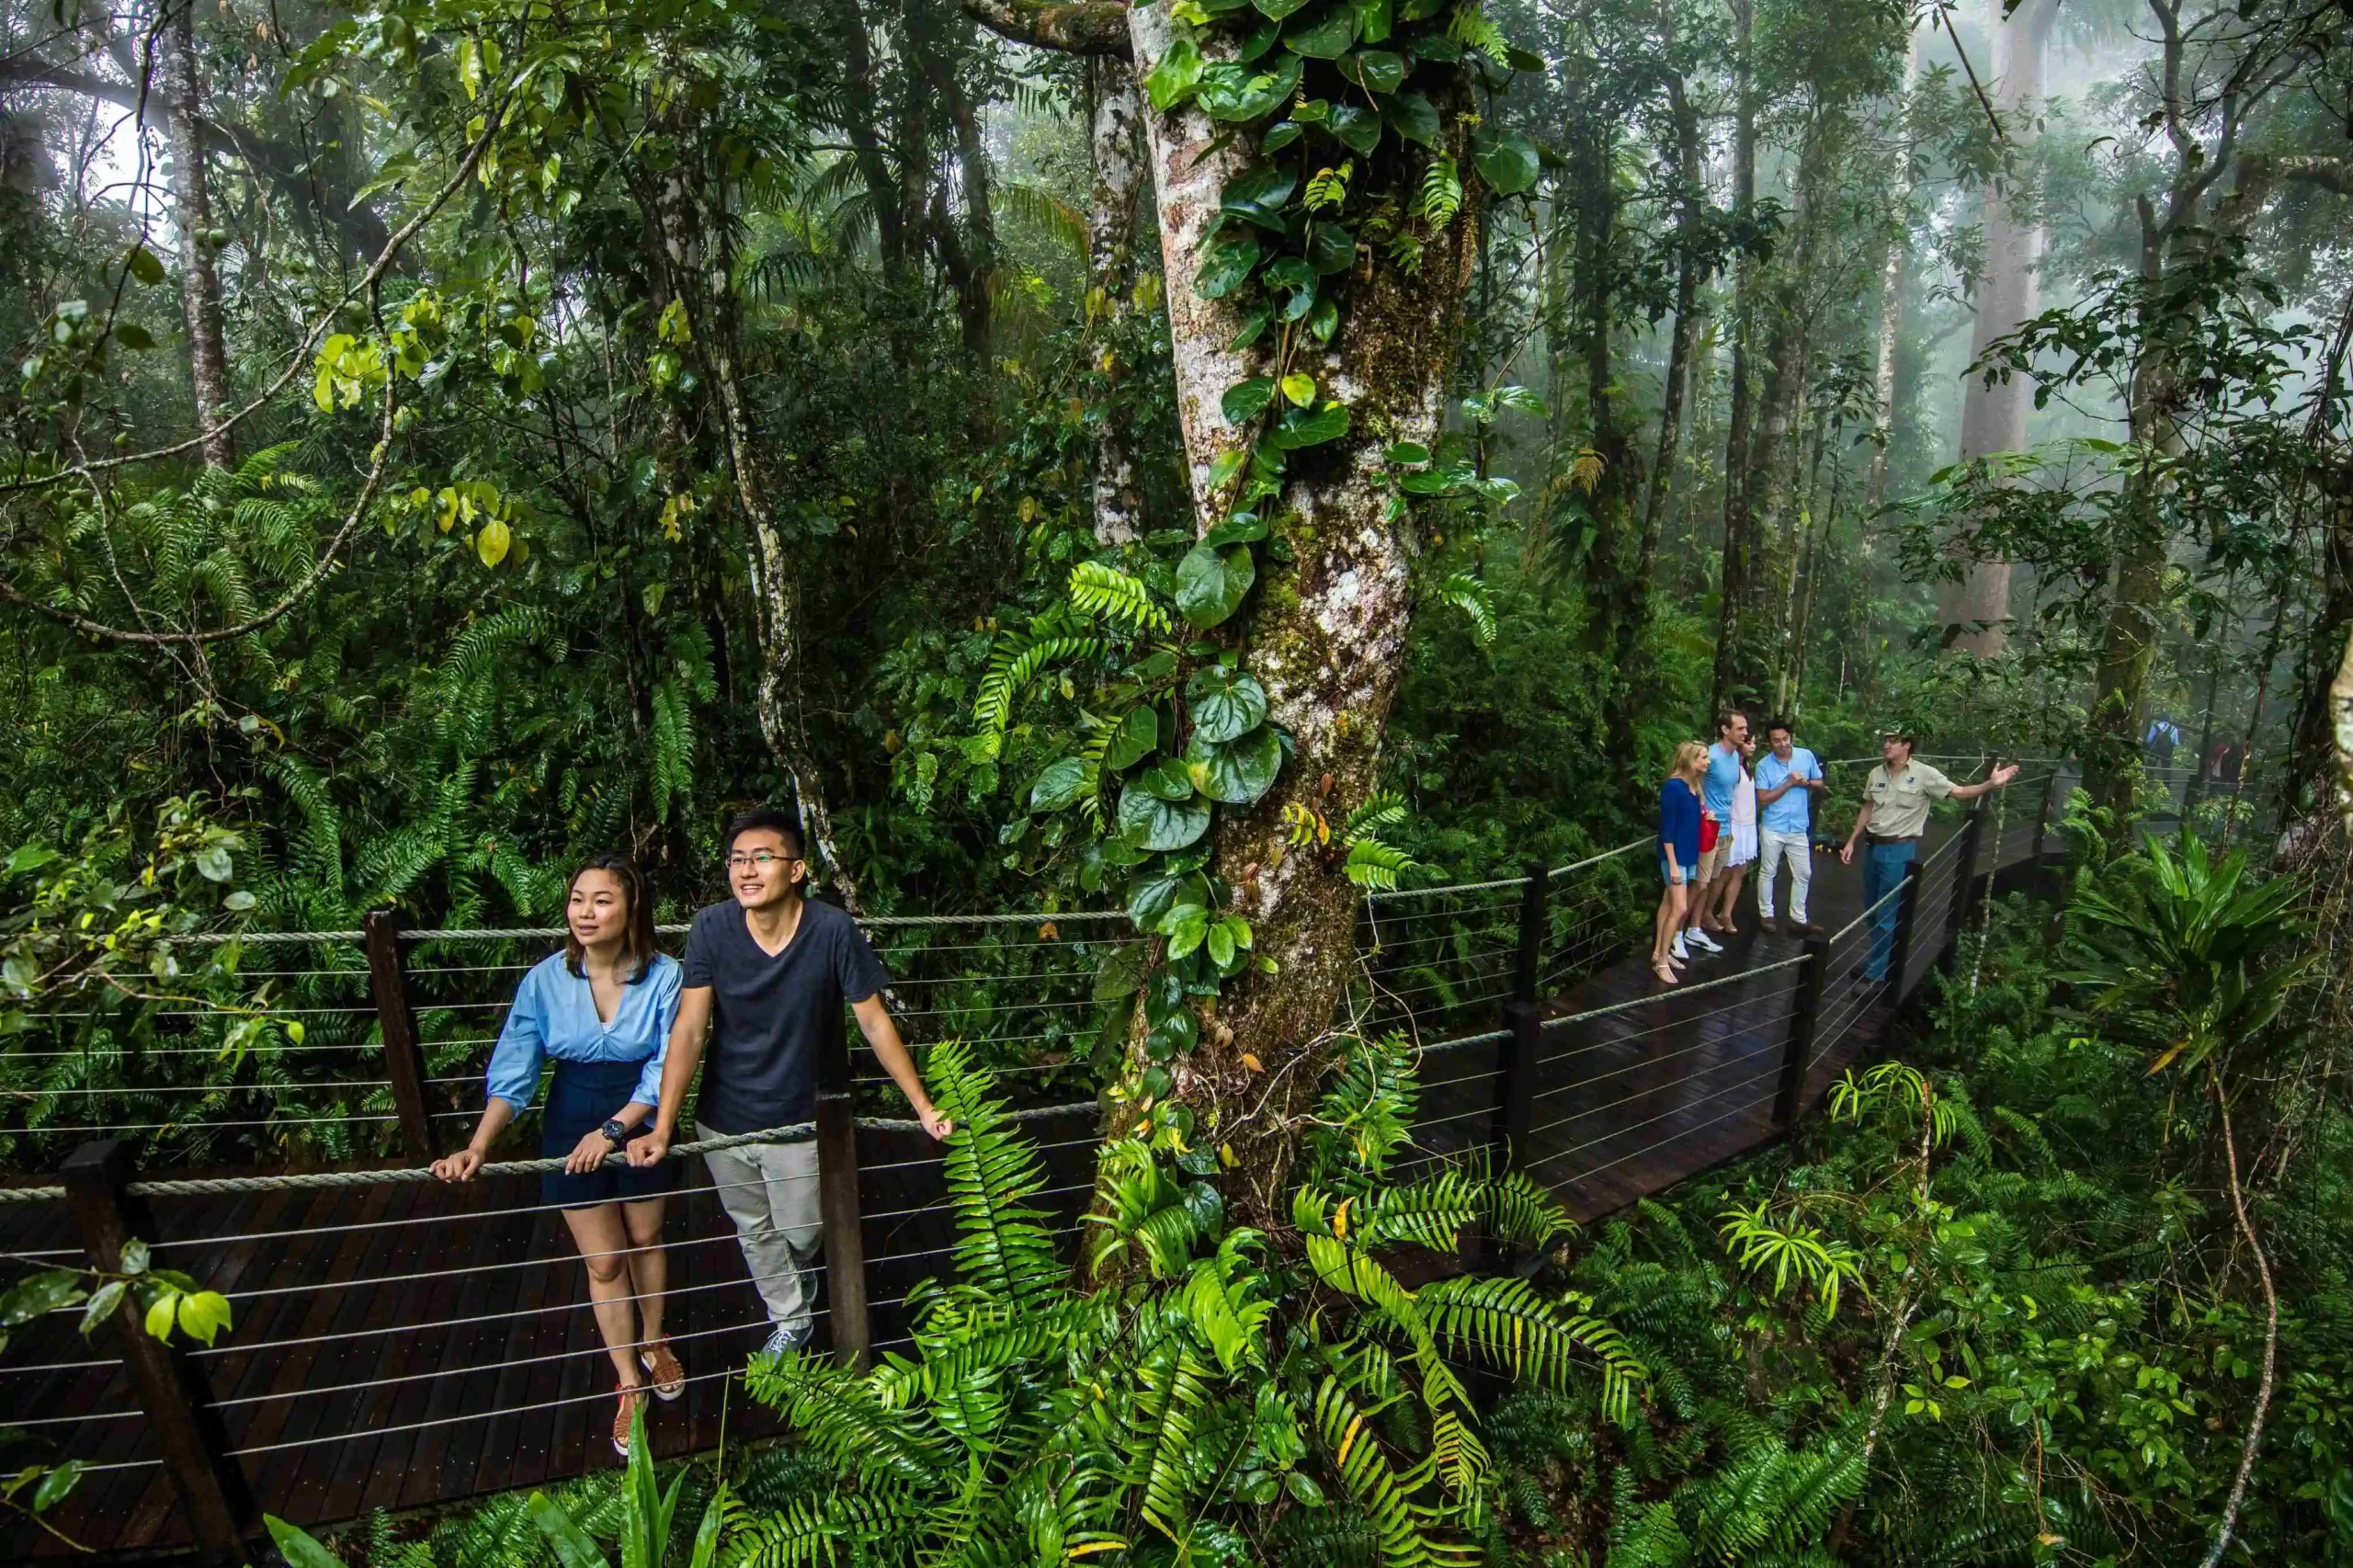 Guests standing on rainforest boardwalk at Red Peak surrounded by rainforest